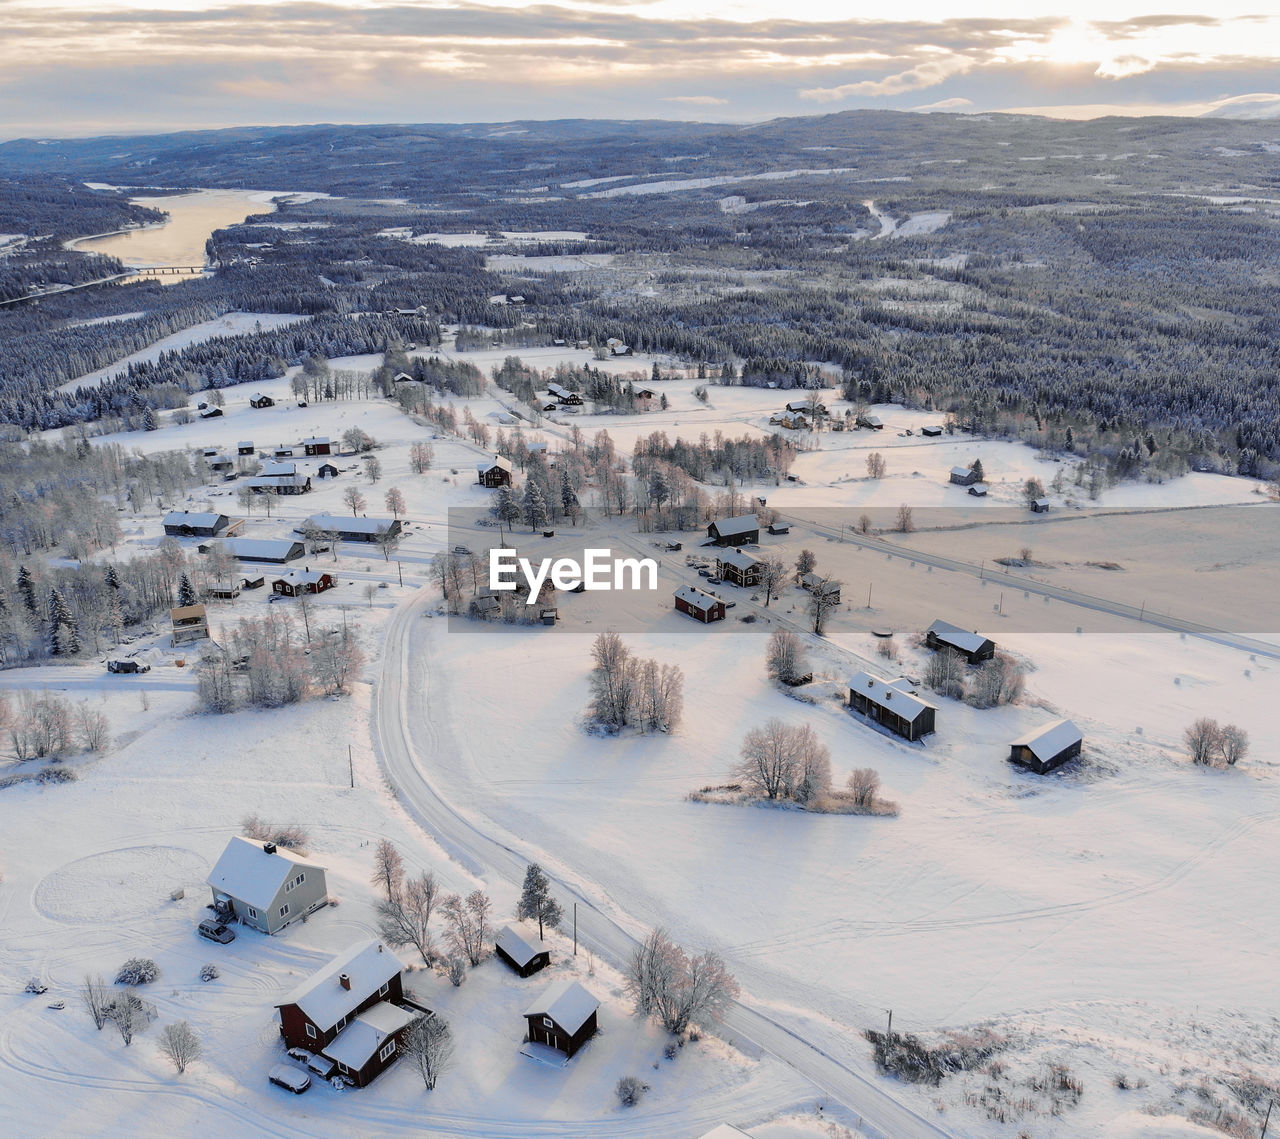 High angle view of snow covered rural landscape